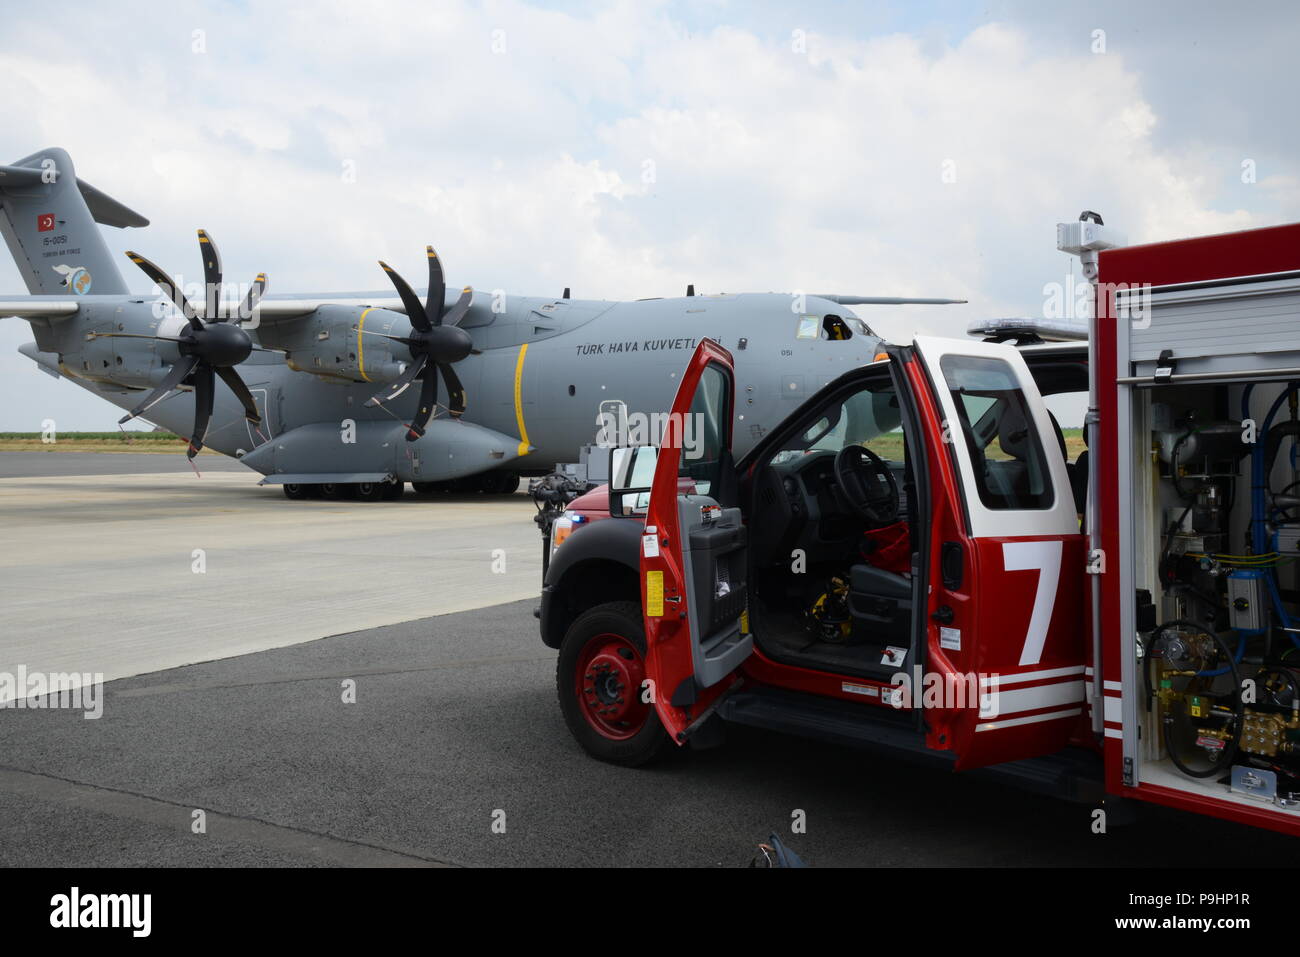 View of Turkish Airbus A400M during 424th Air Base Squadron' Fire fighter exercise, in Chièvres Air Base, Belgium, July 12, 2018. (U.S. Army photo by Visual Information Specialist Pascal Demeuldre) Stock Photo